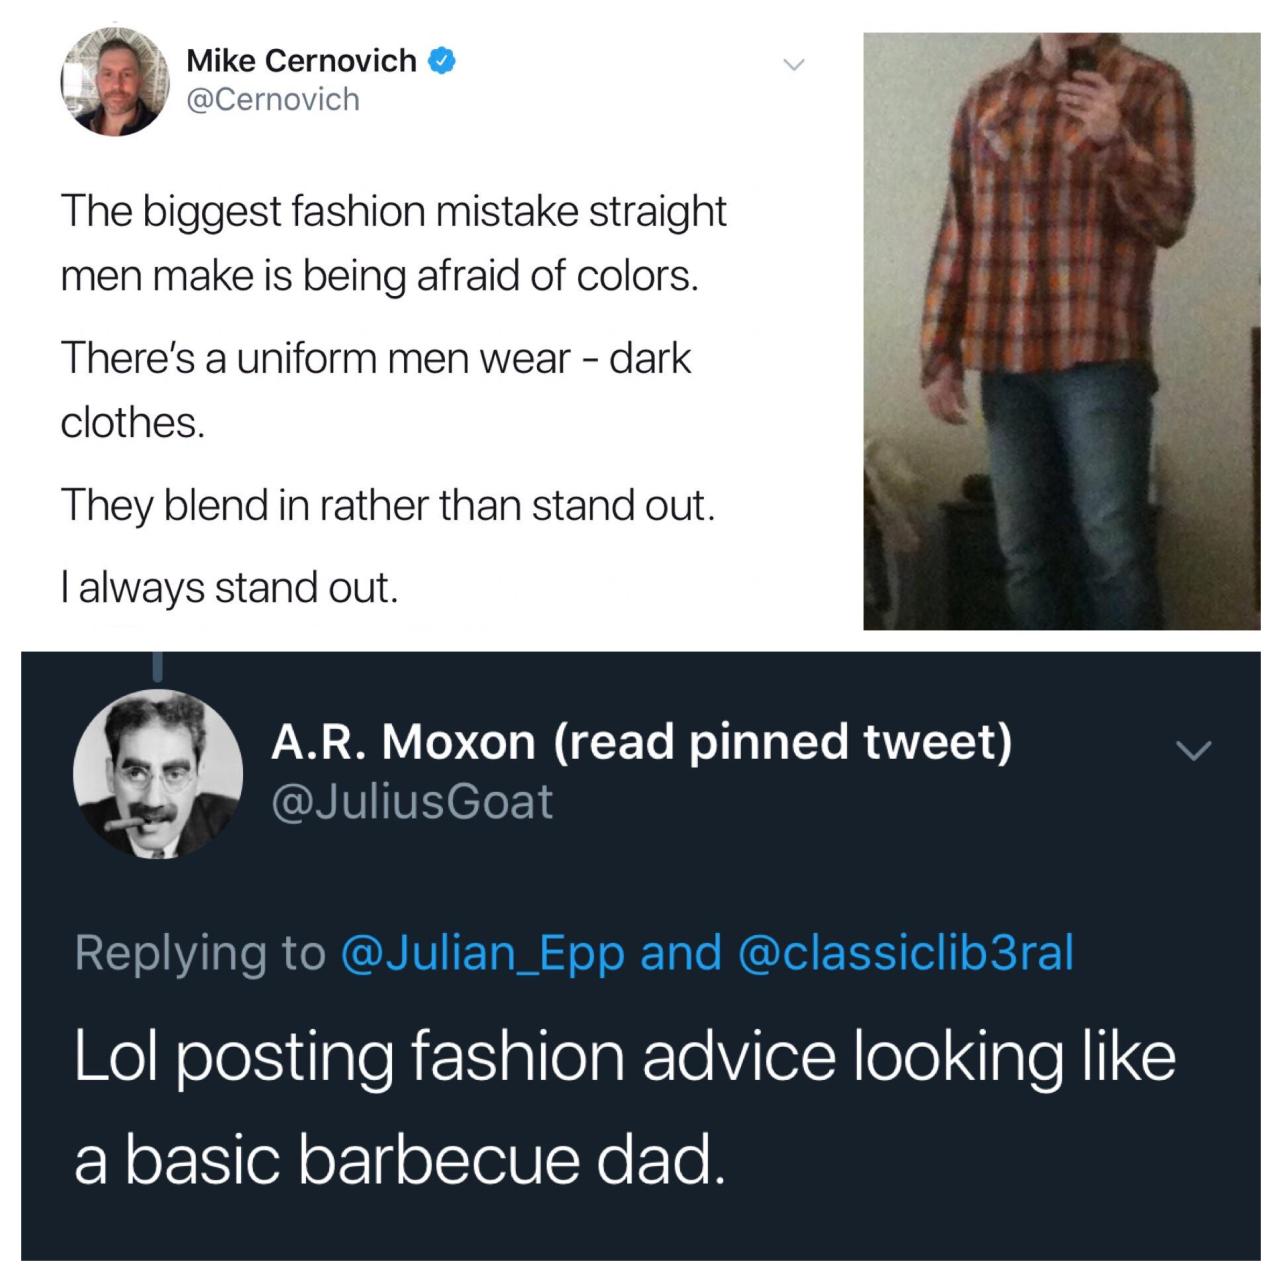 presentation - Mike Cernovich The biggest fashion mistake straight men make is being afraid of colors. There's a uniform men wear dark clothes. They blend in rather than stand out. Talways stand out. A.R. Moxon read pinned tweet and Lol posting fashion ad